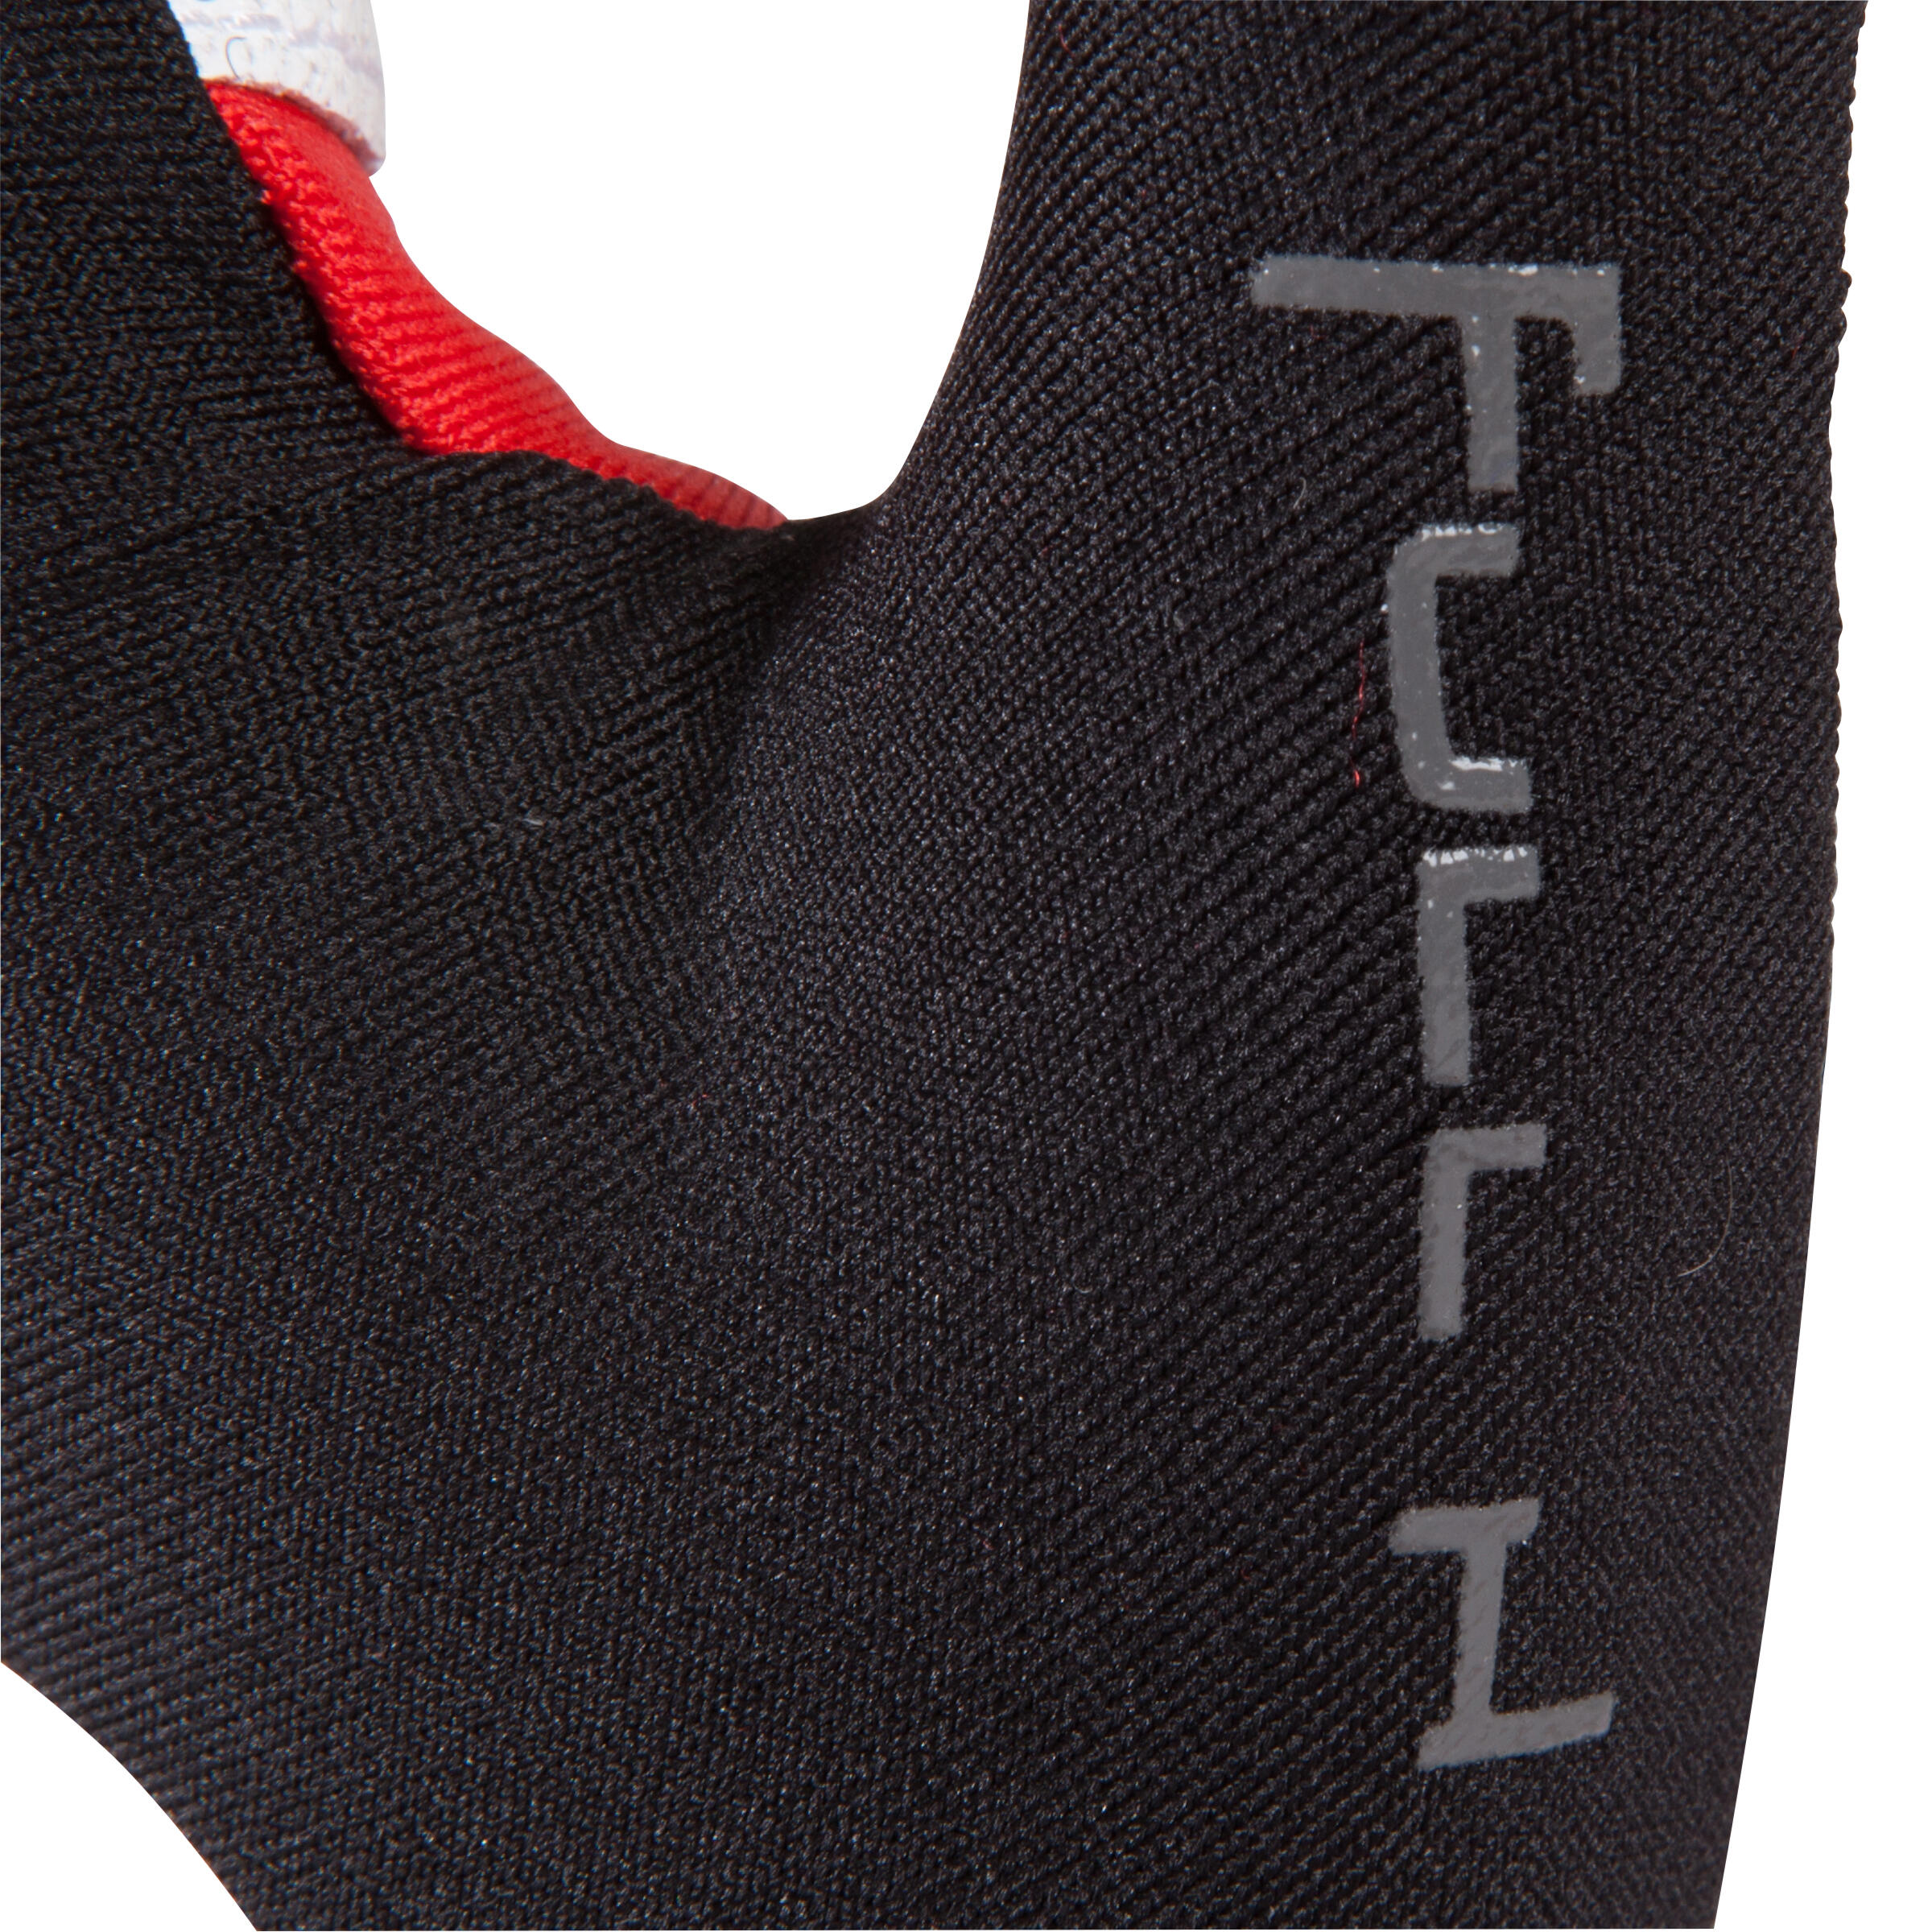 Full H Rugby Mitts - Black Red  4/8